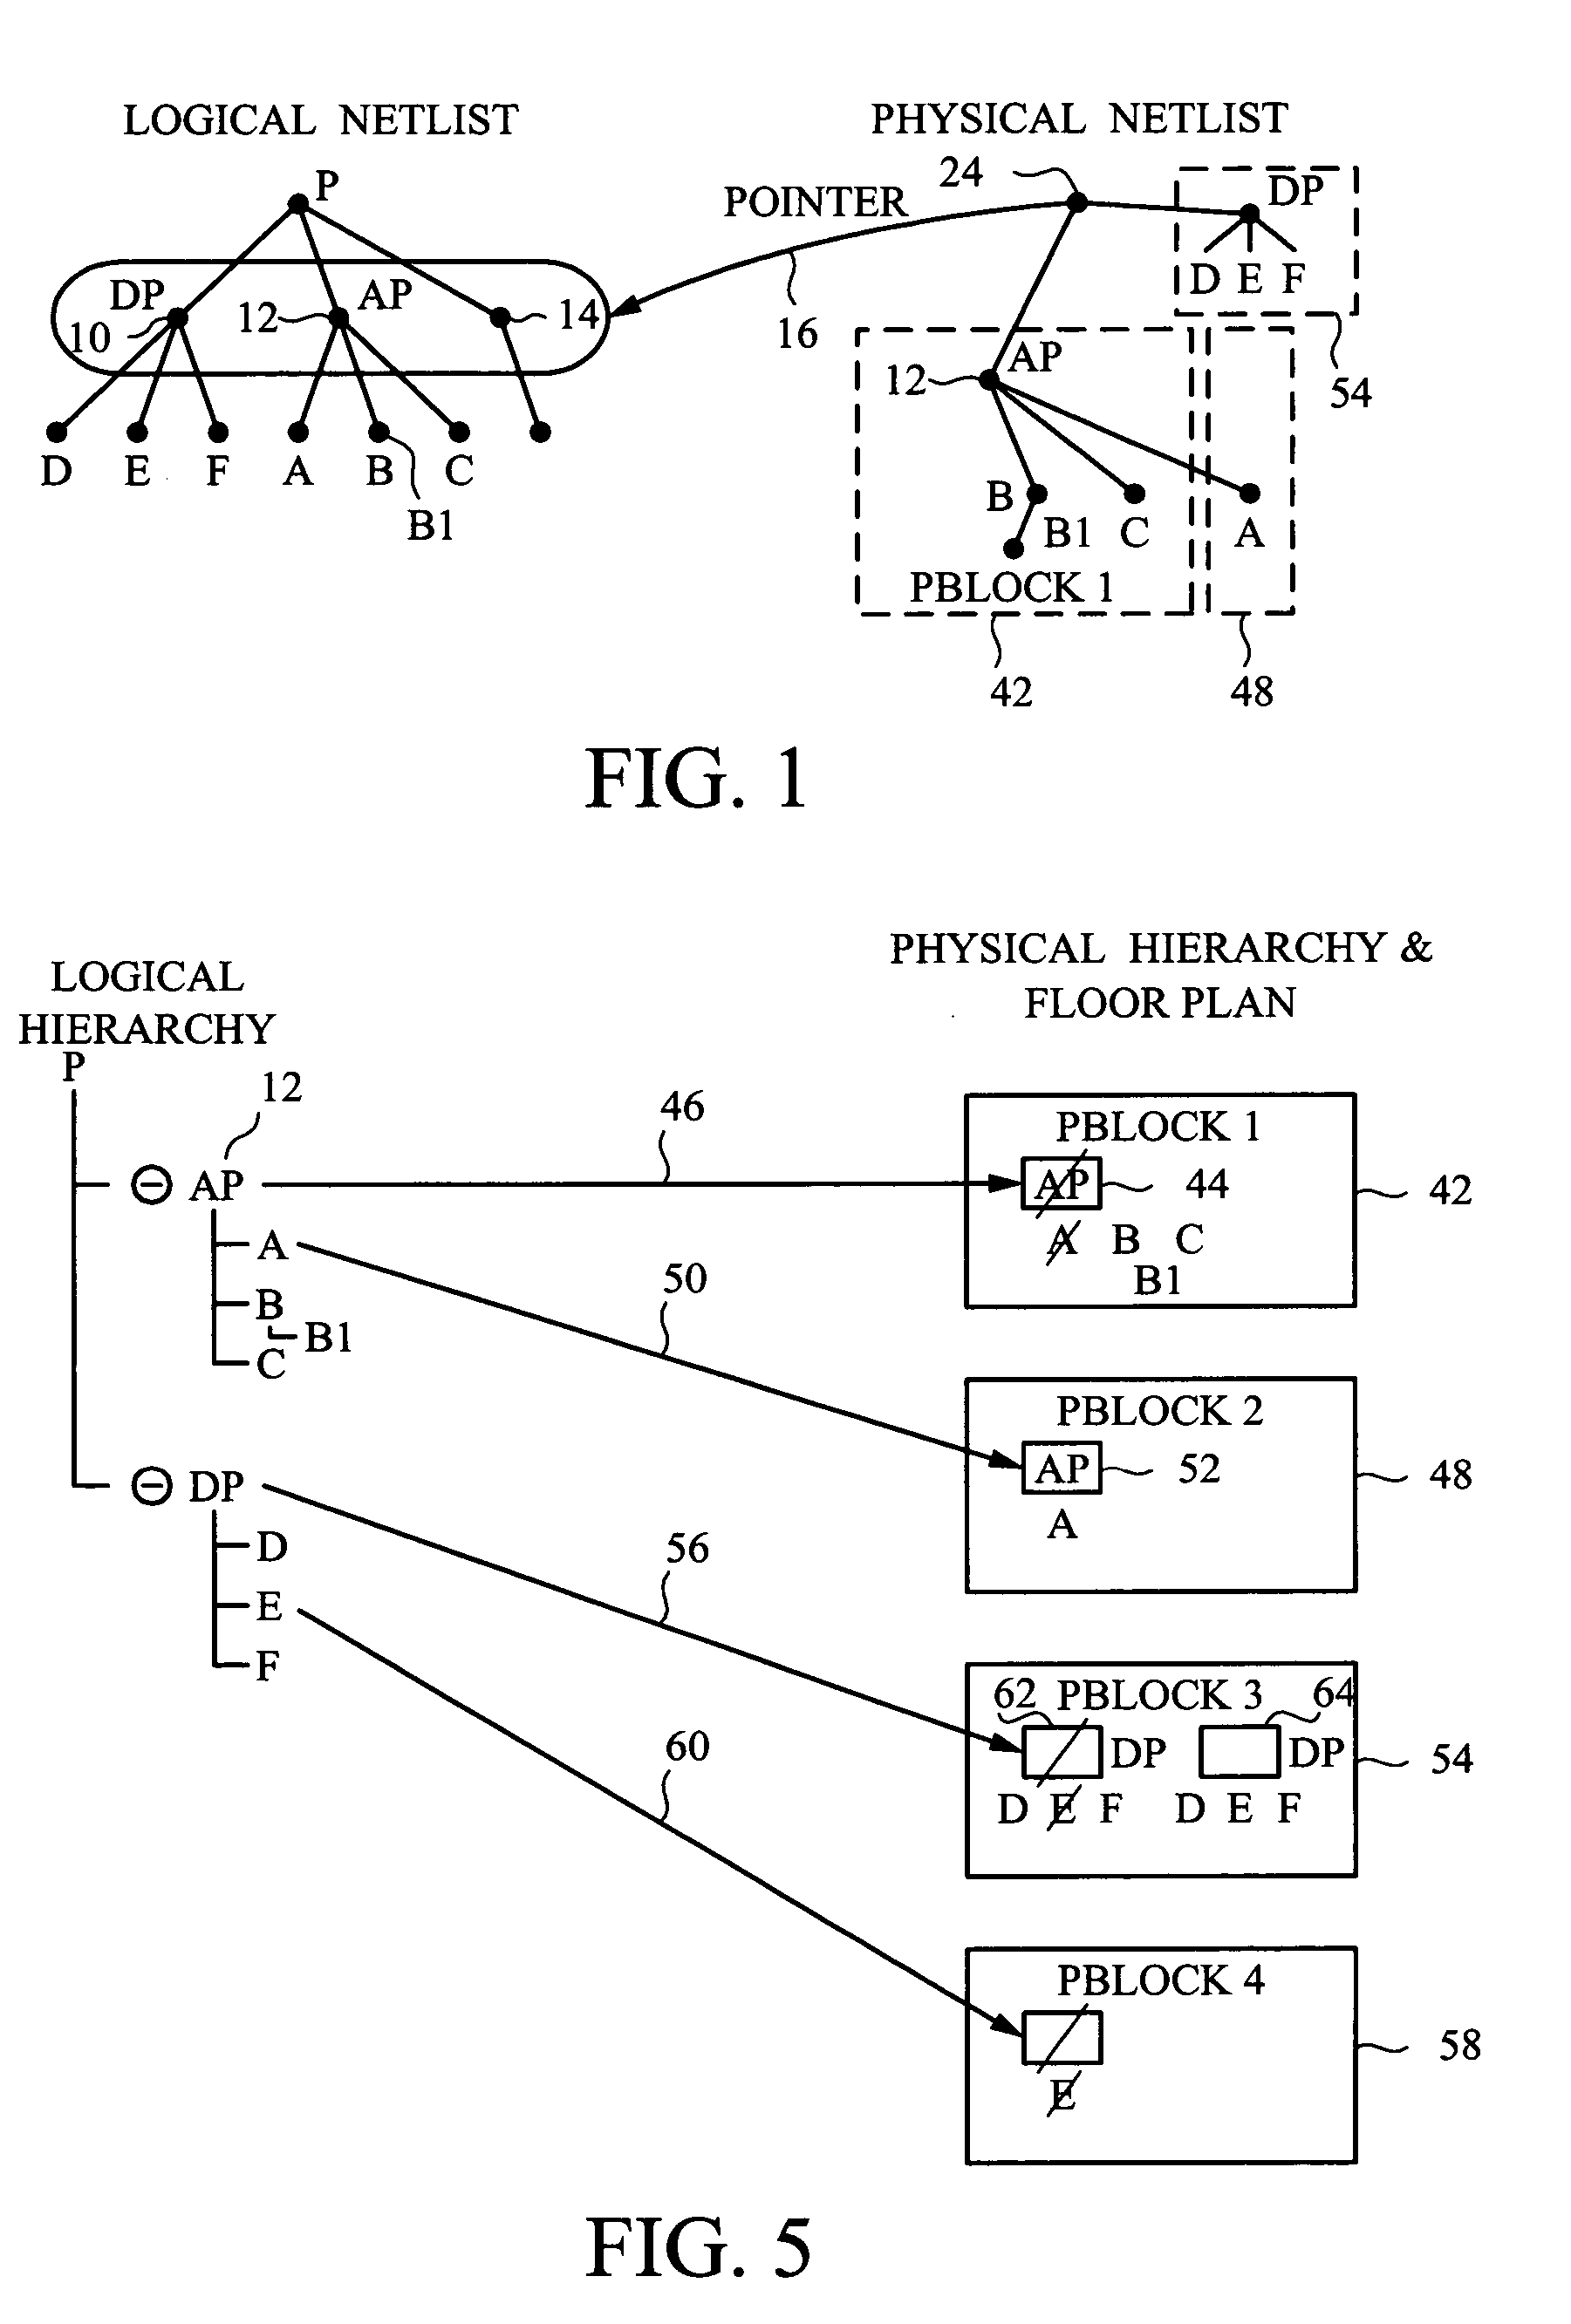 System for representing the logical and physical information of an integrated circuit